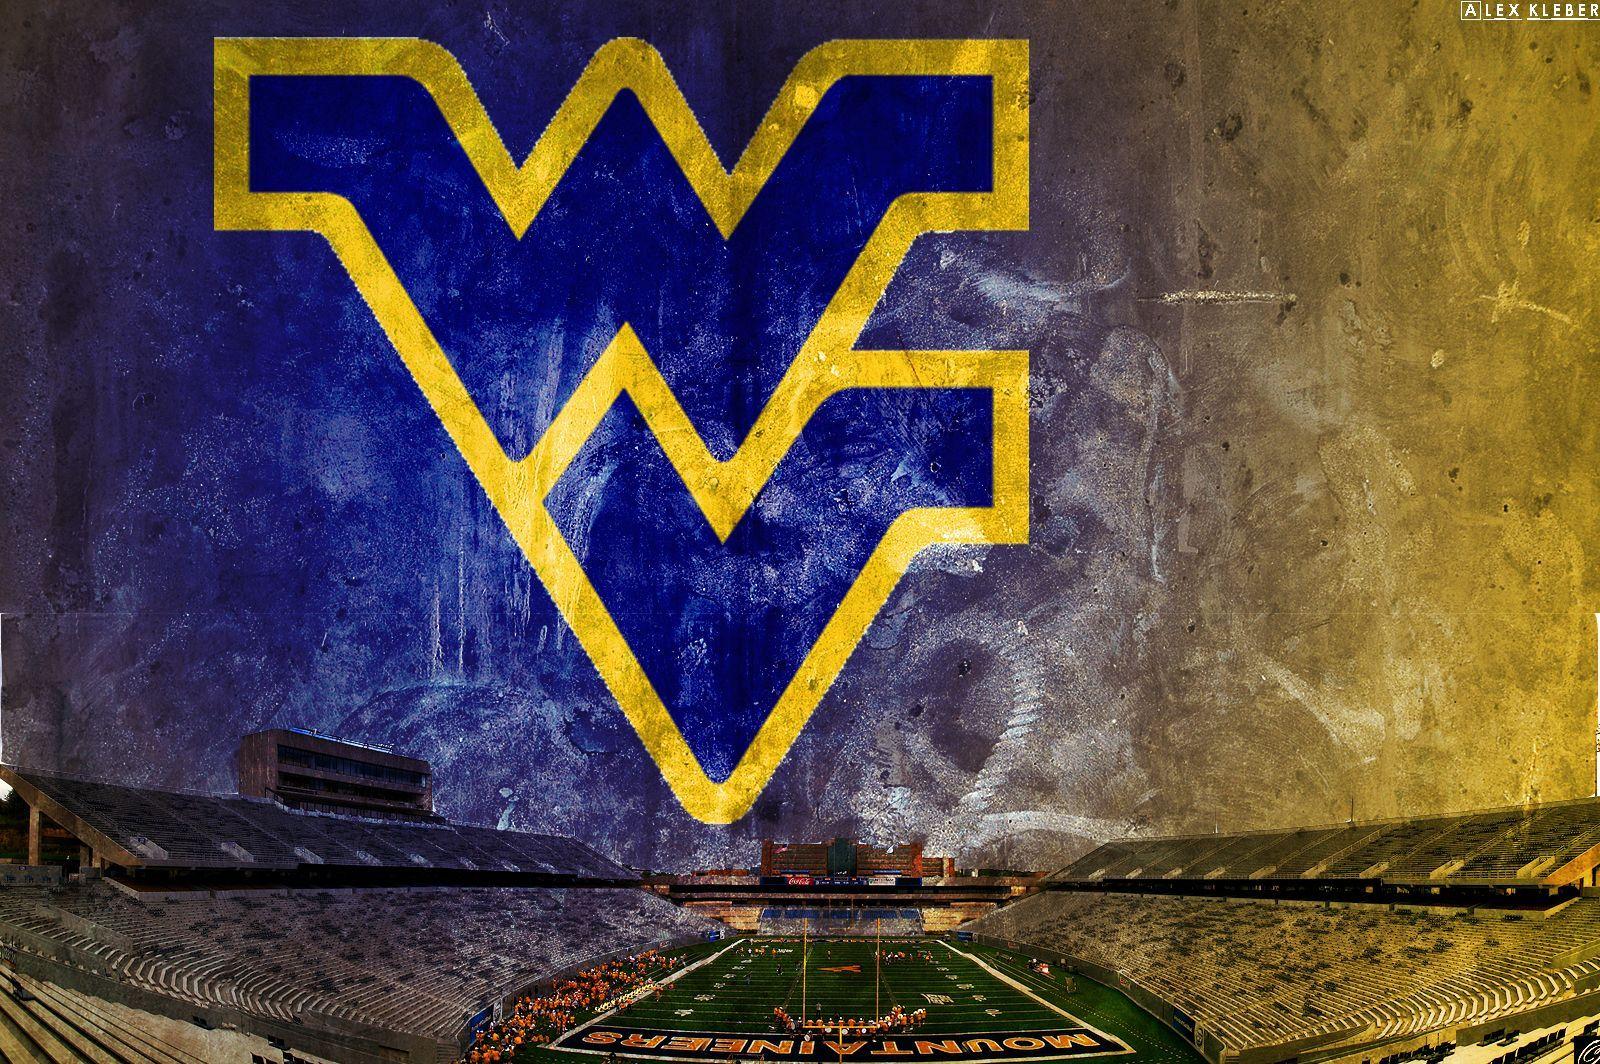 WV Football Logo - pictures of wvu mountaineers | WVU Wallpaper by klebz | Things I ...